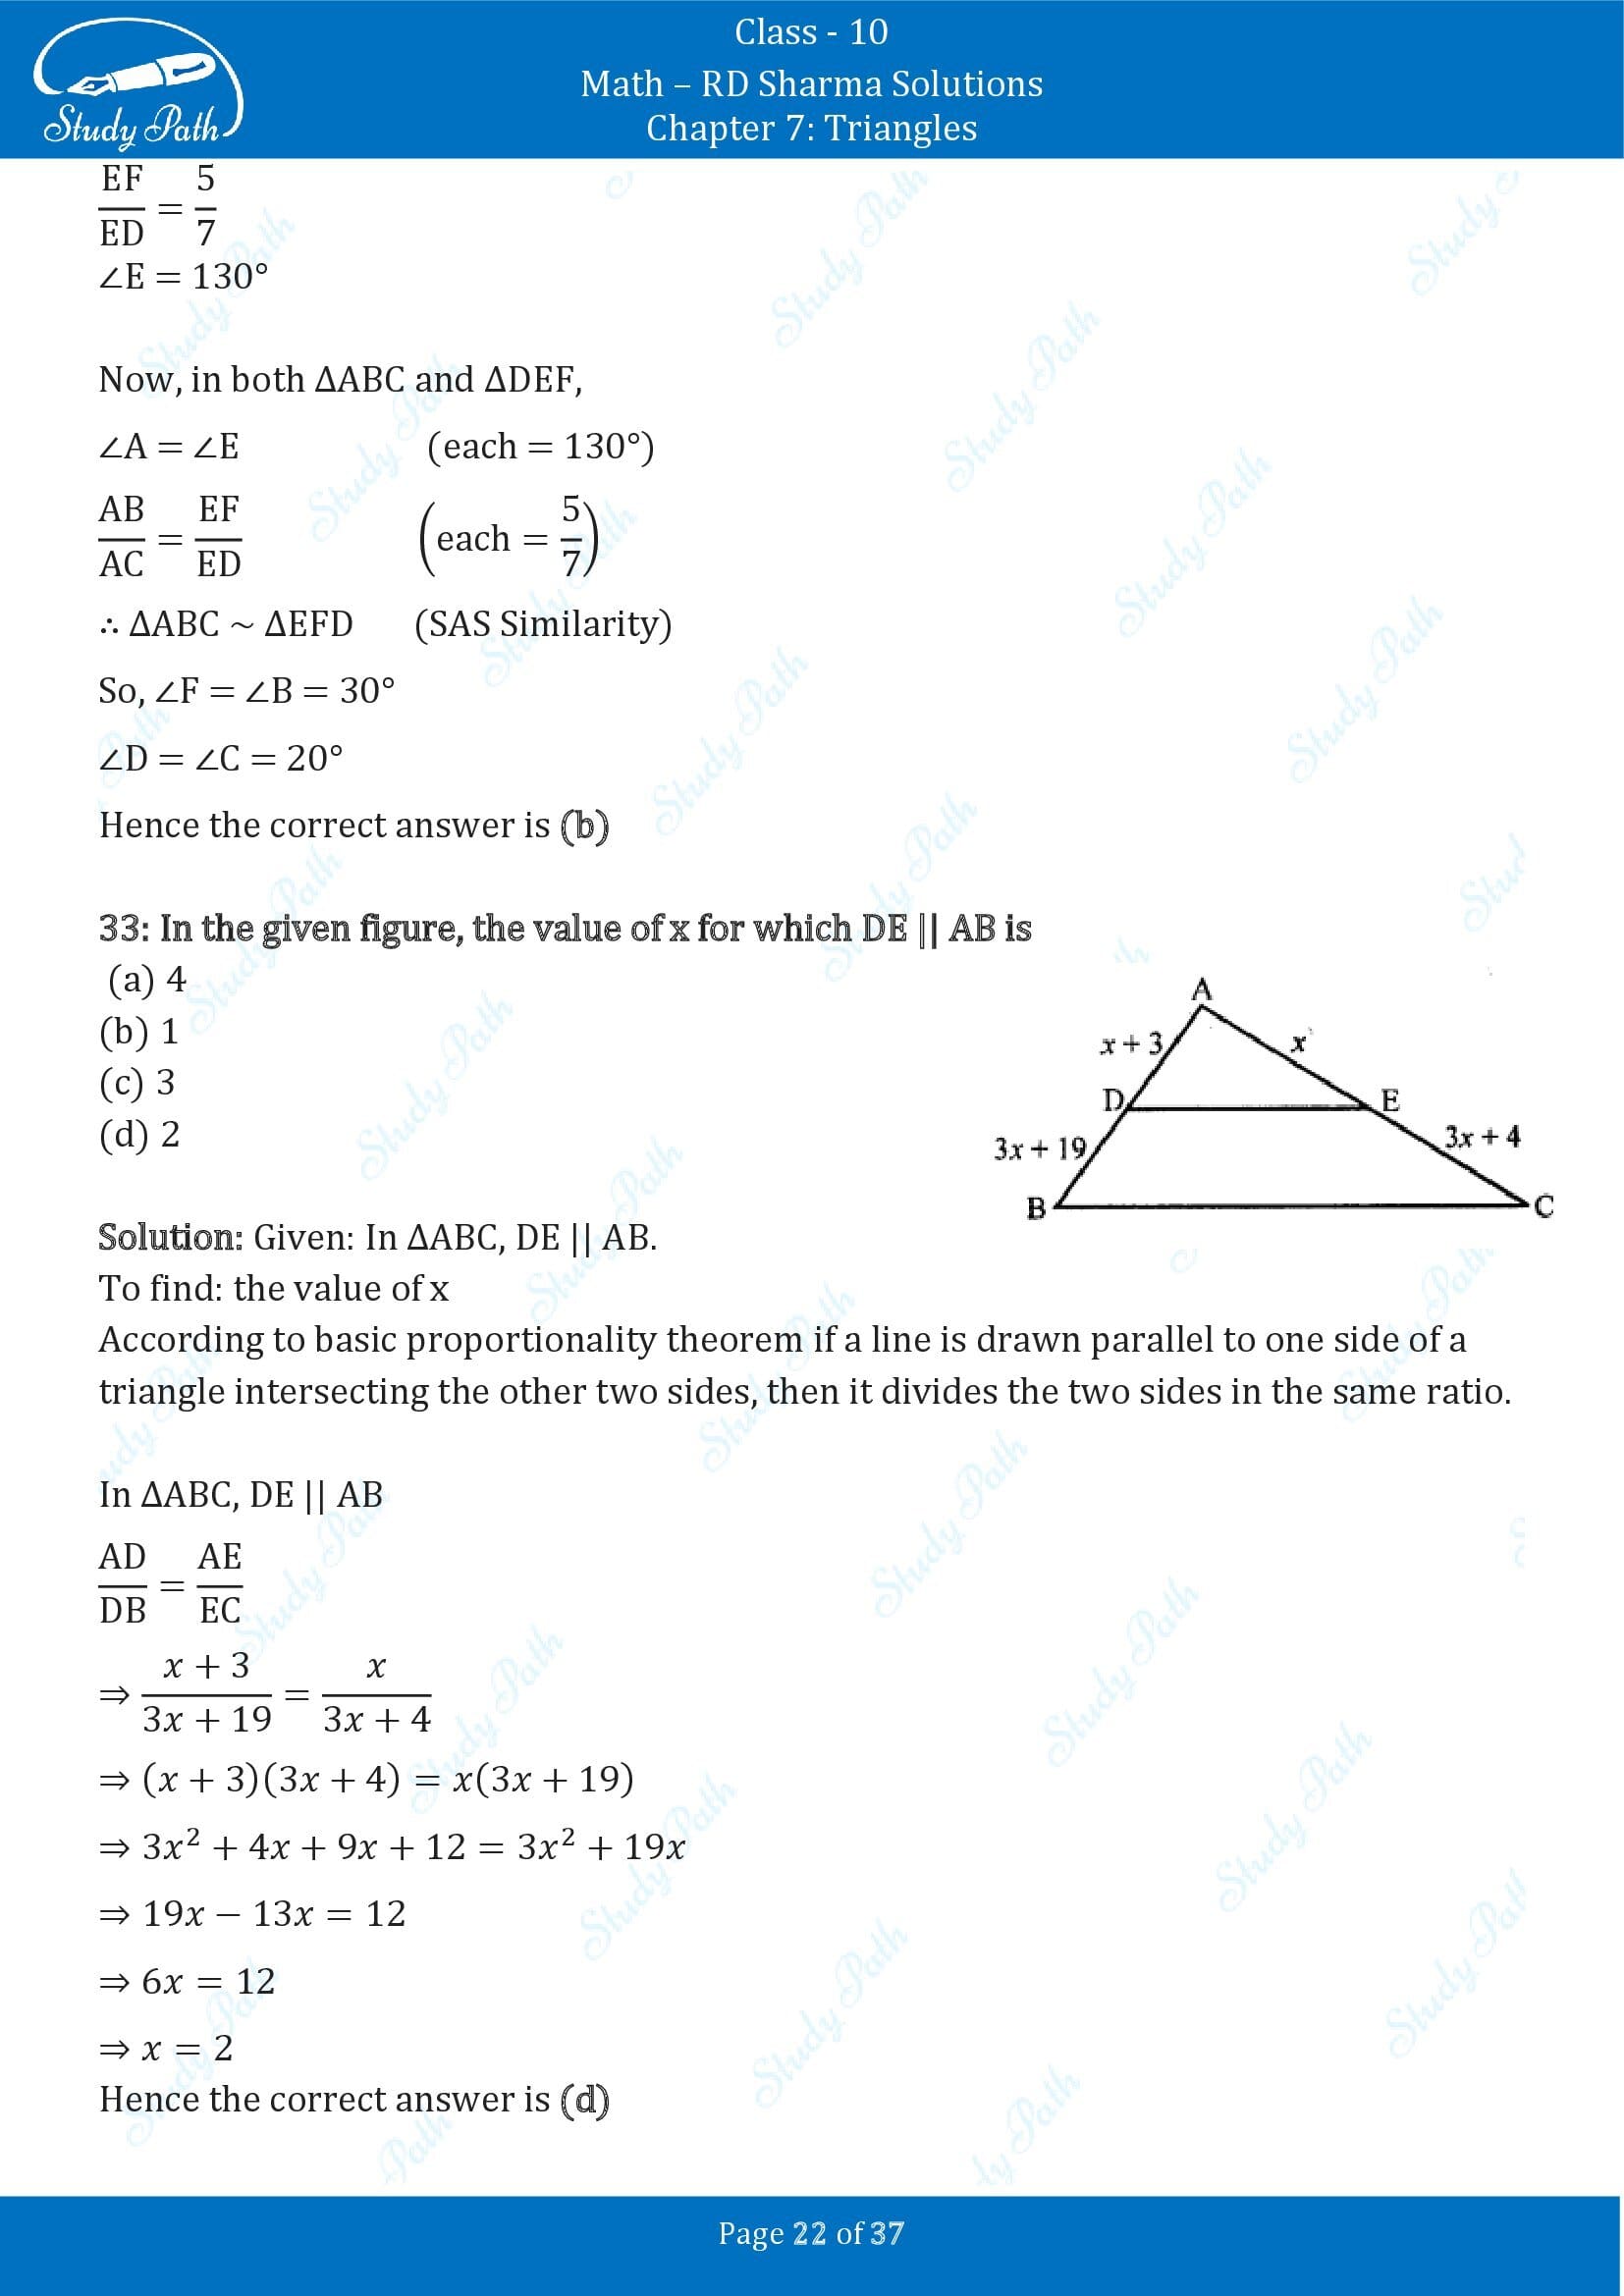 RD Sharma Solutions Class 10 Chapter 7 Triangles Multiple Choice Question MCQs 00022